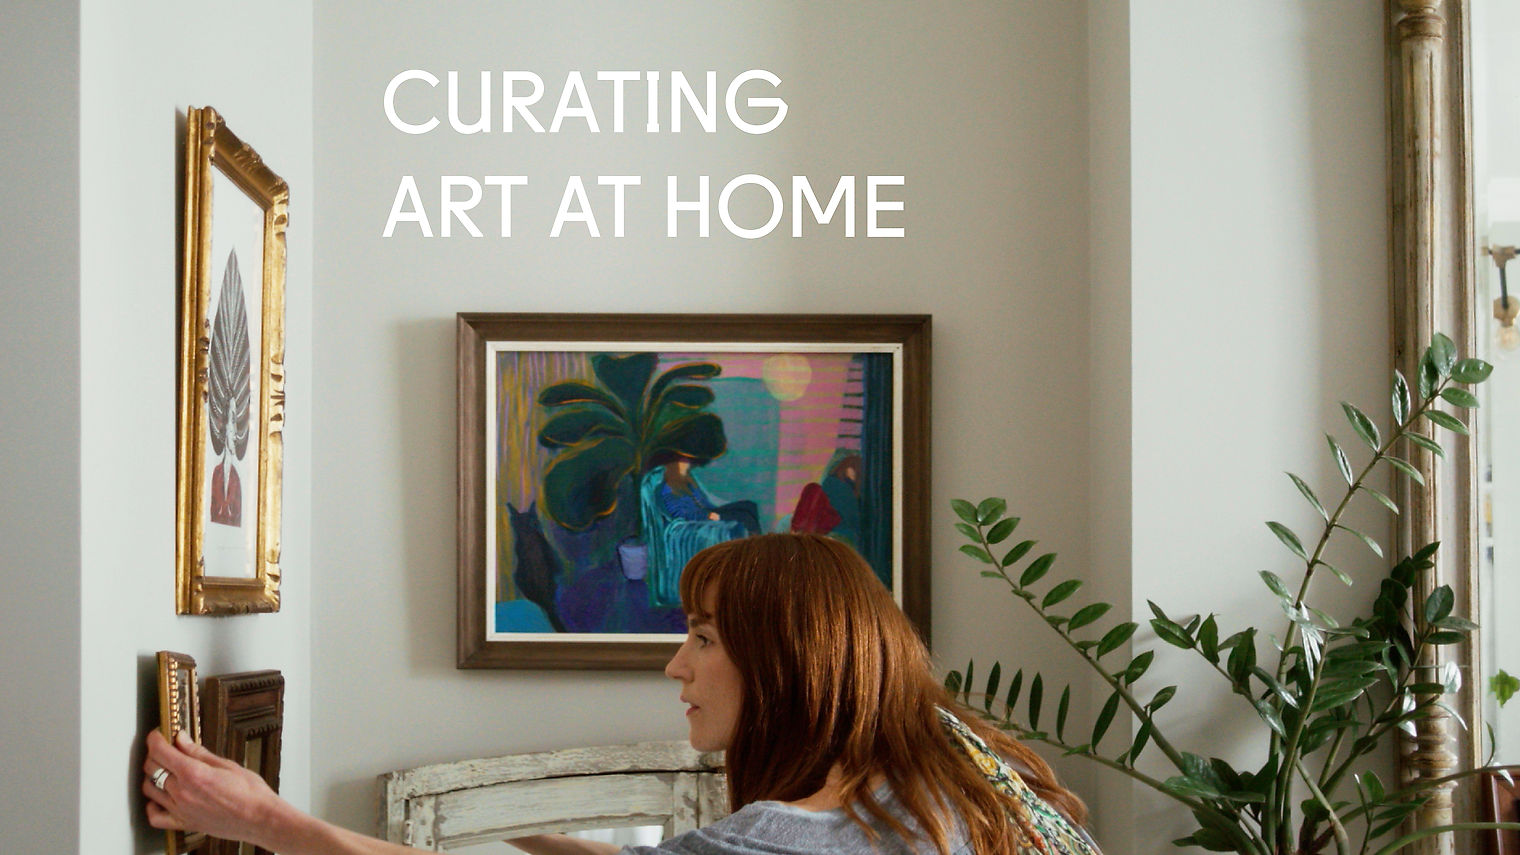 How to Curate Art at Home